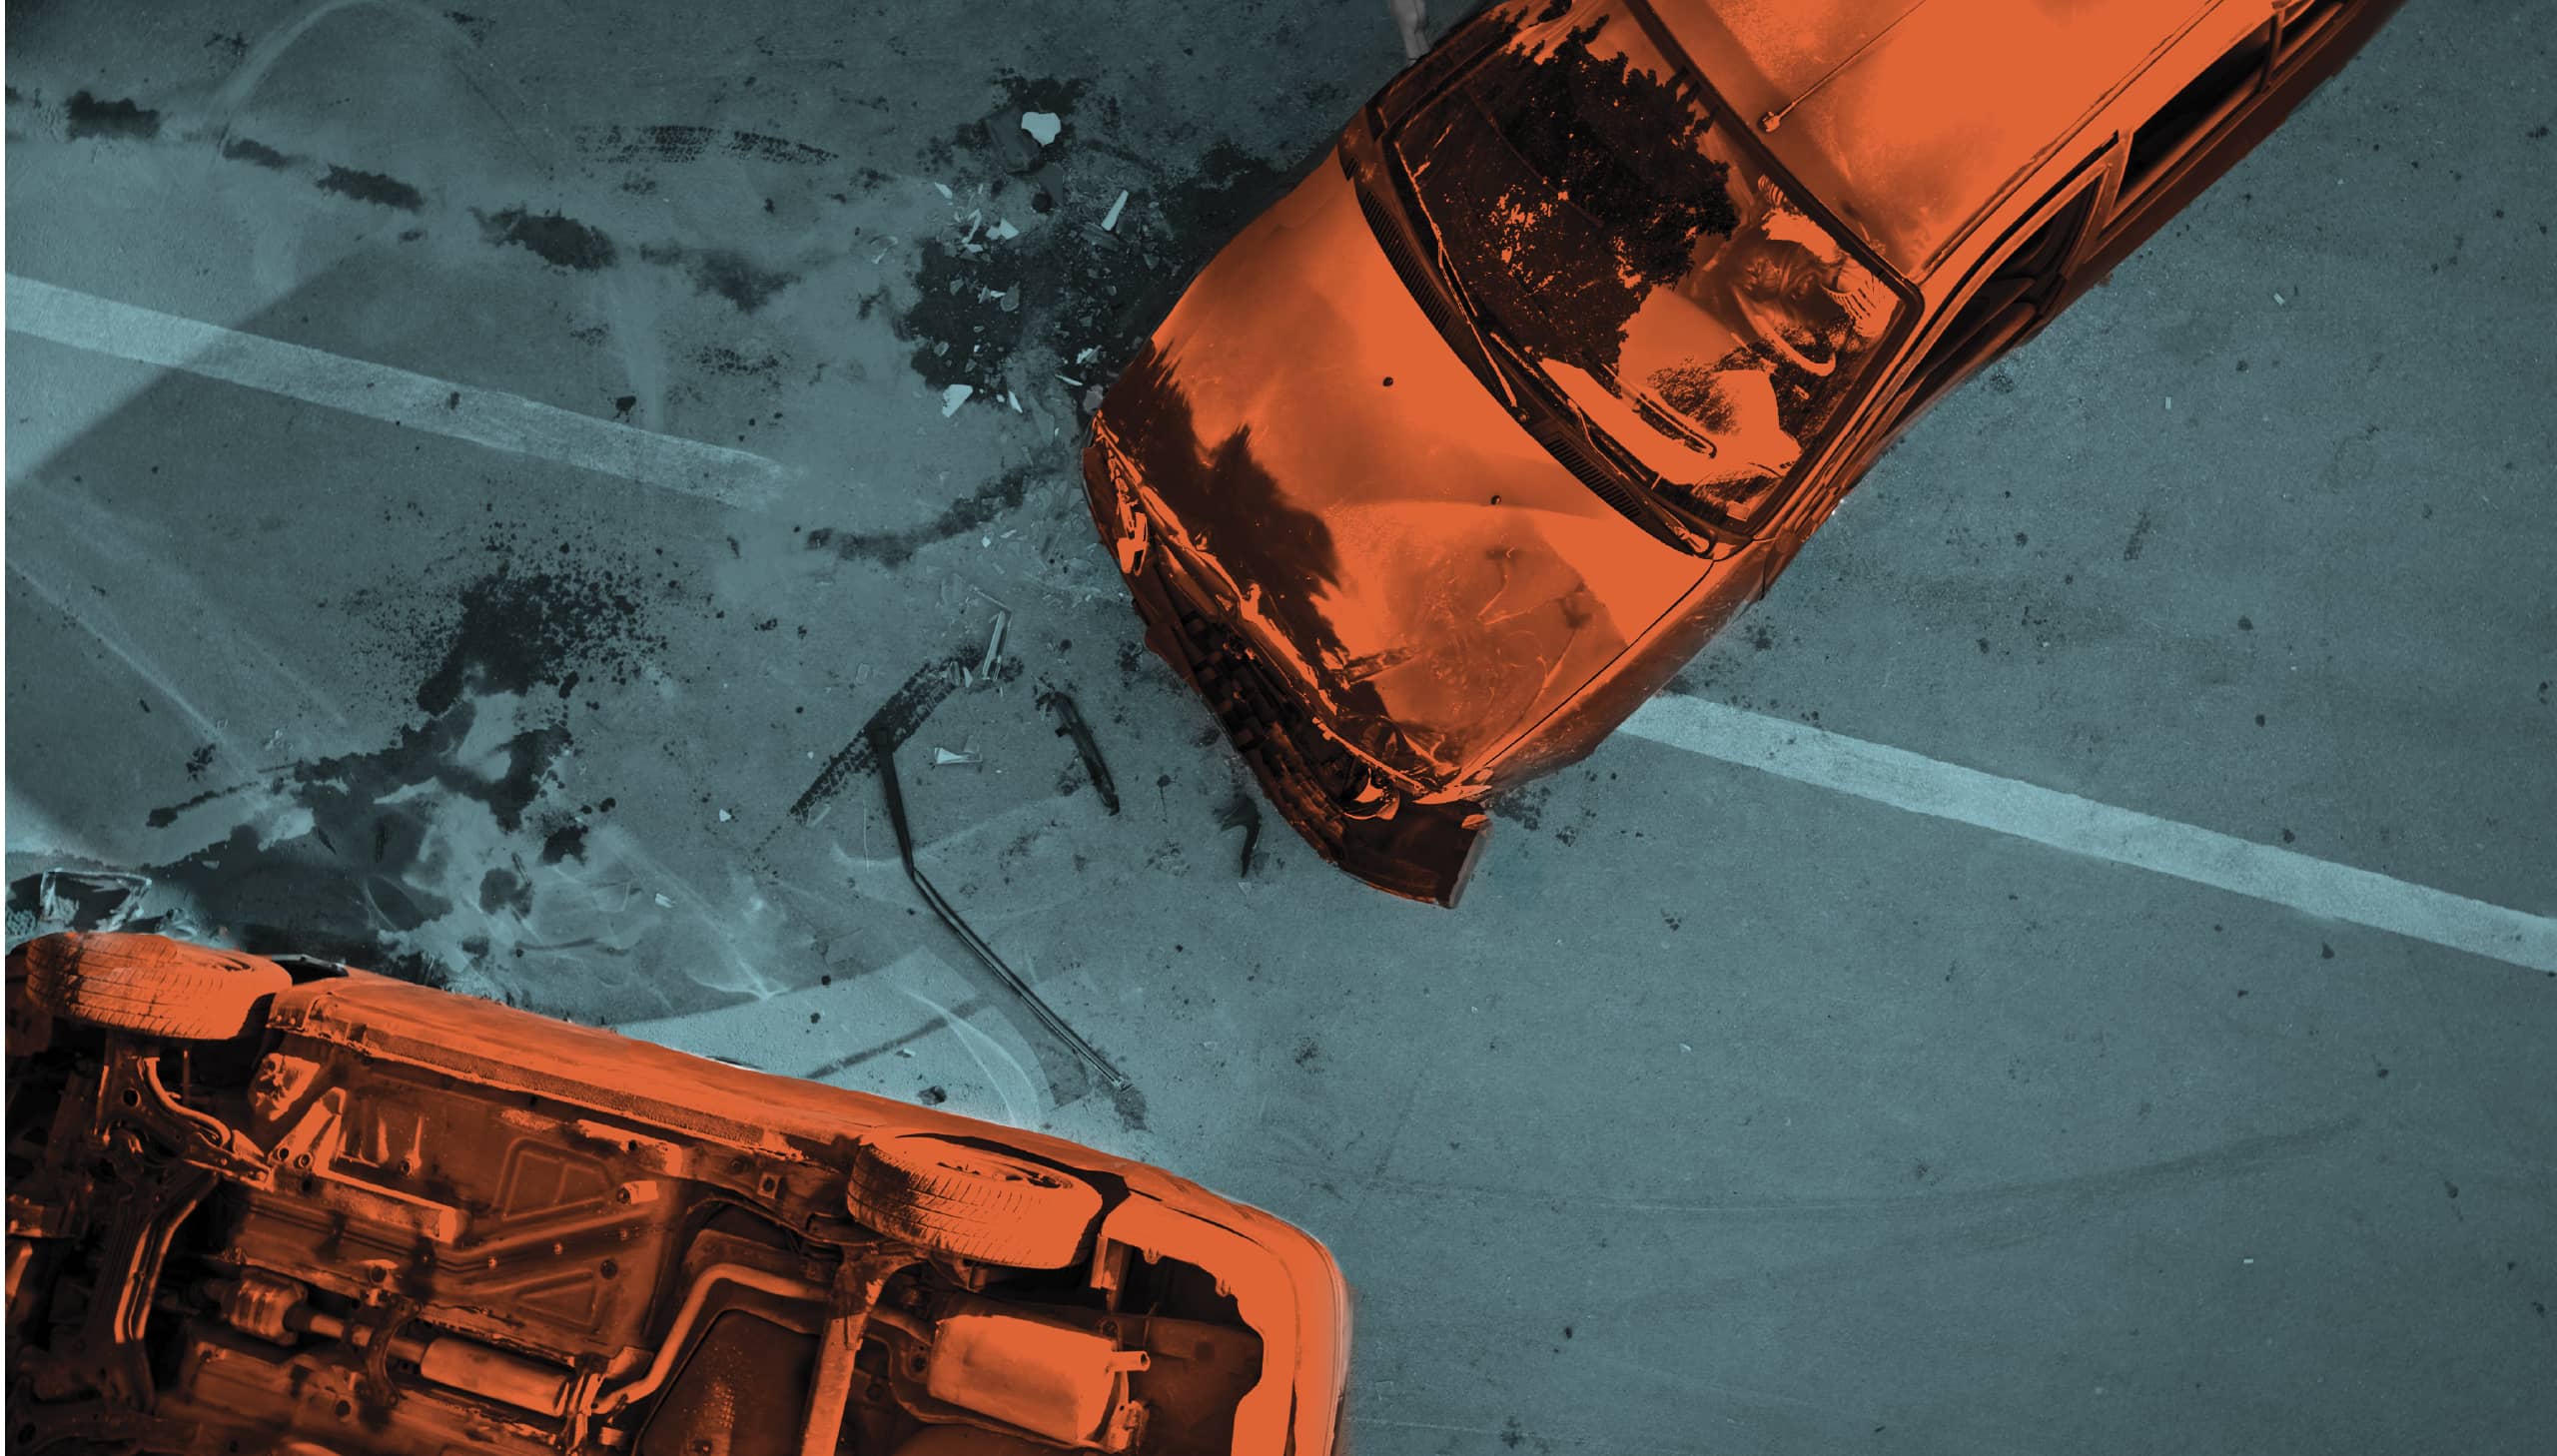 Aerial view of two cars in a car accident